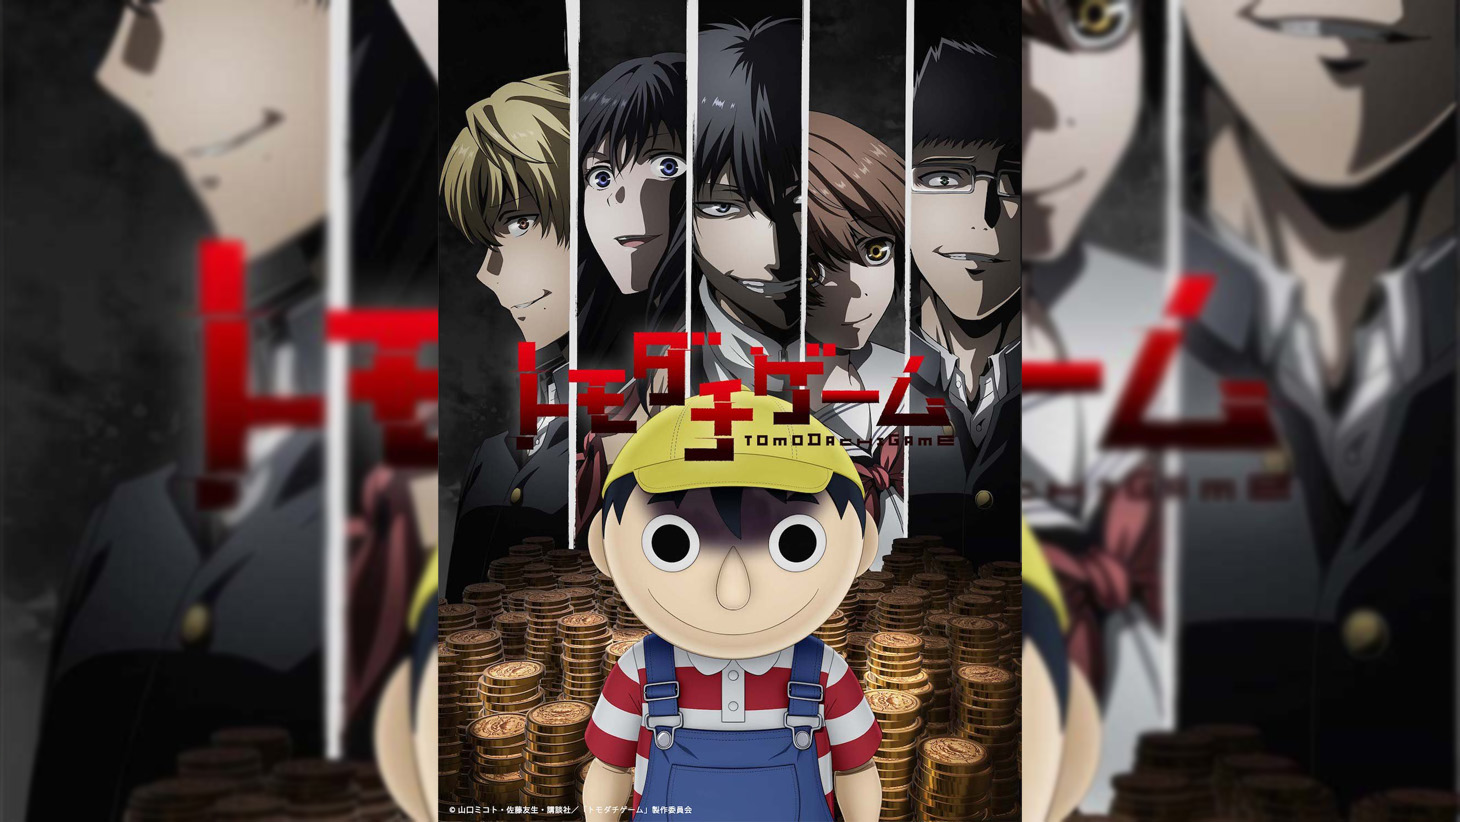 Tomodachi Game Anime Gets April 5 Premiere Date, New Key Visual Released -  Anime Corner